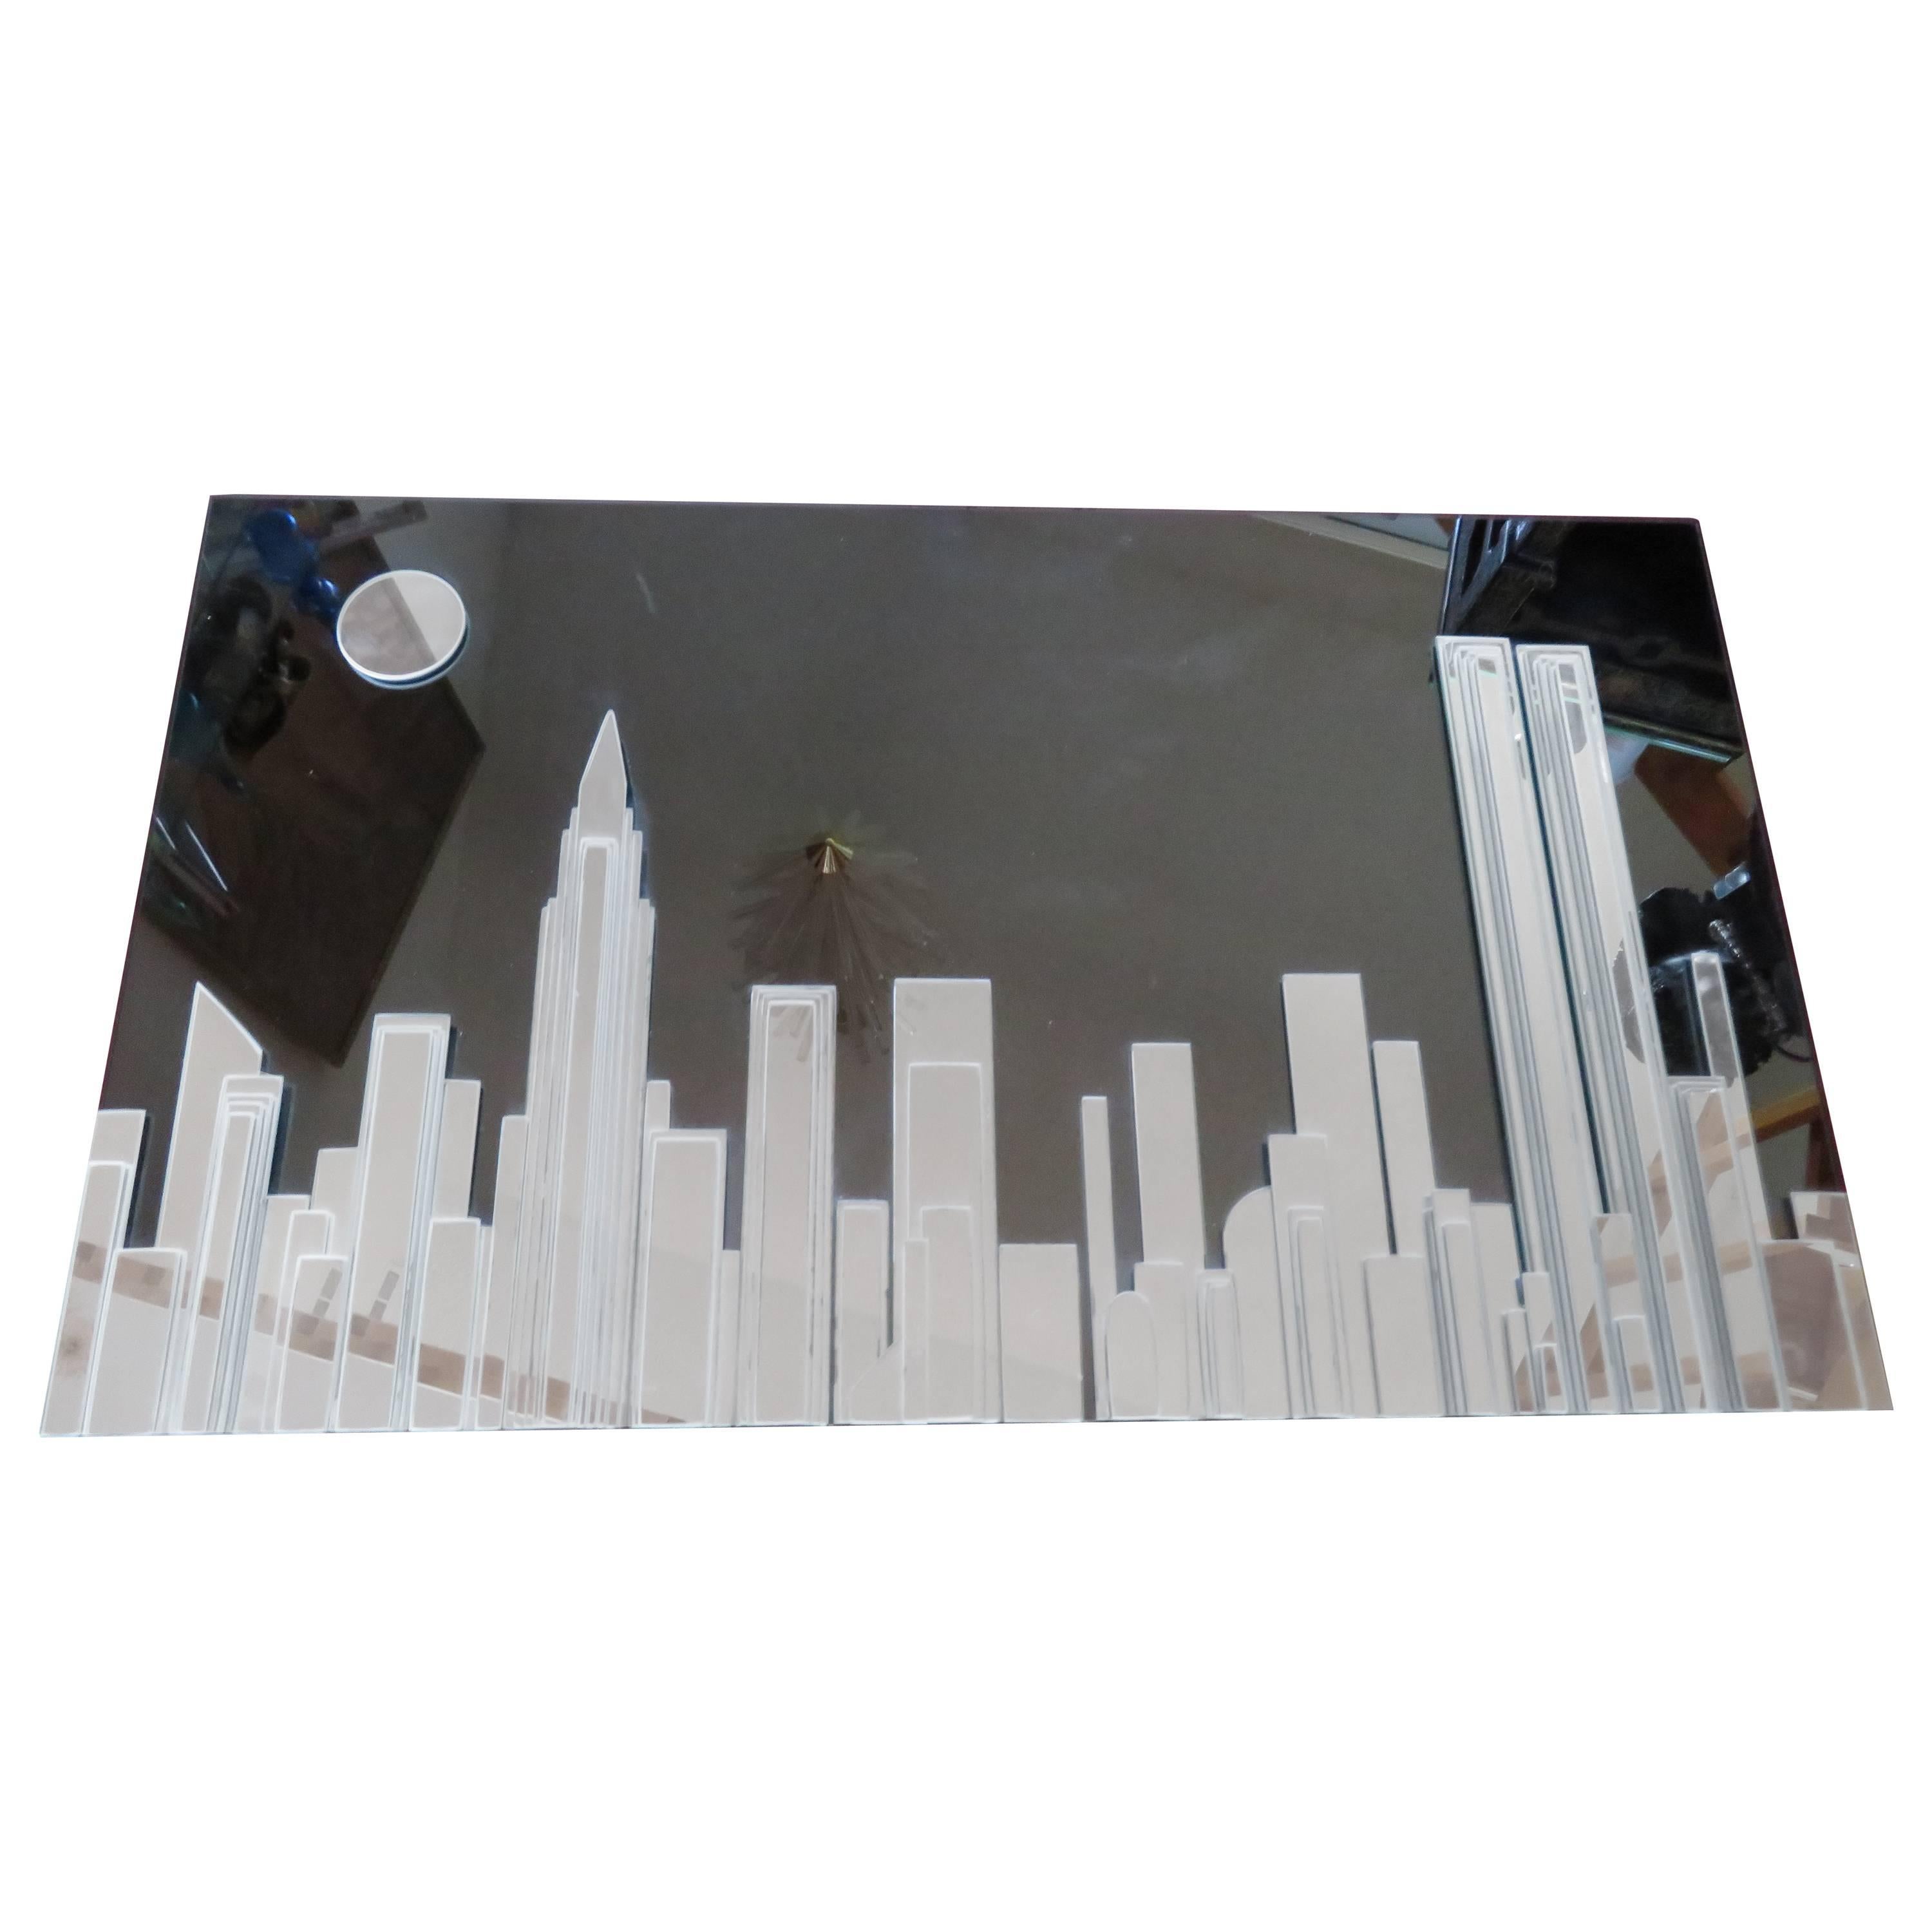 NYC Skyline Mirror Harvard Reflections Twin Towers Empire State Building For Sale